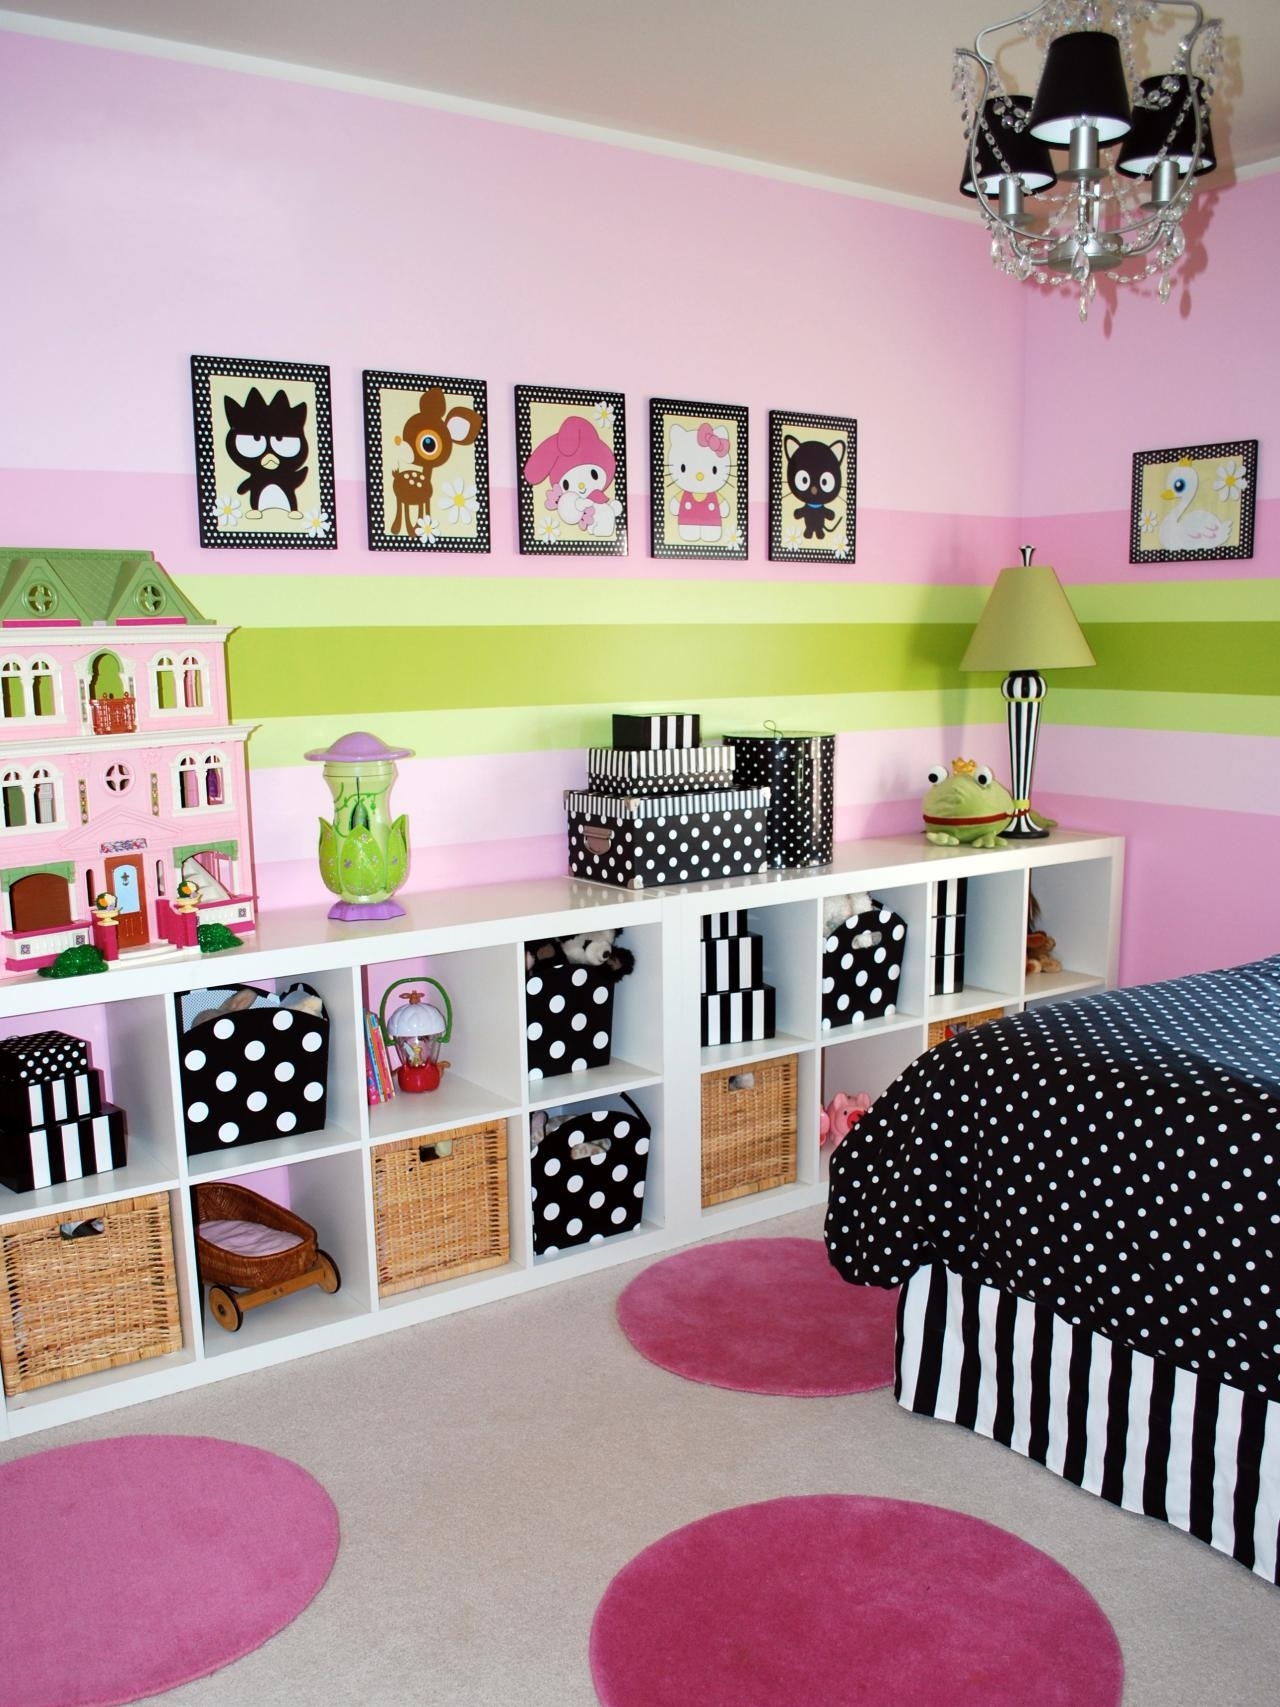 10 Attractive Toddler Room Ideas For Girls %name 2022